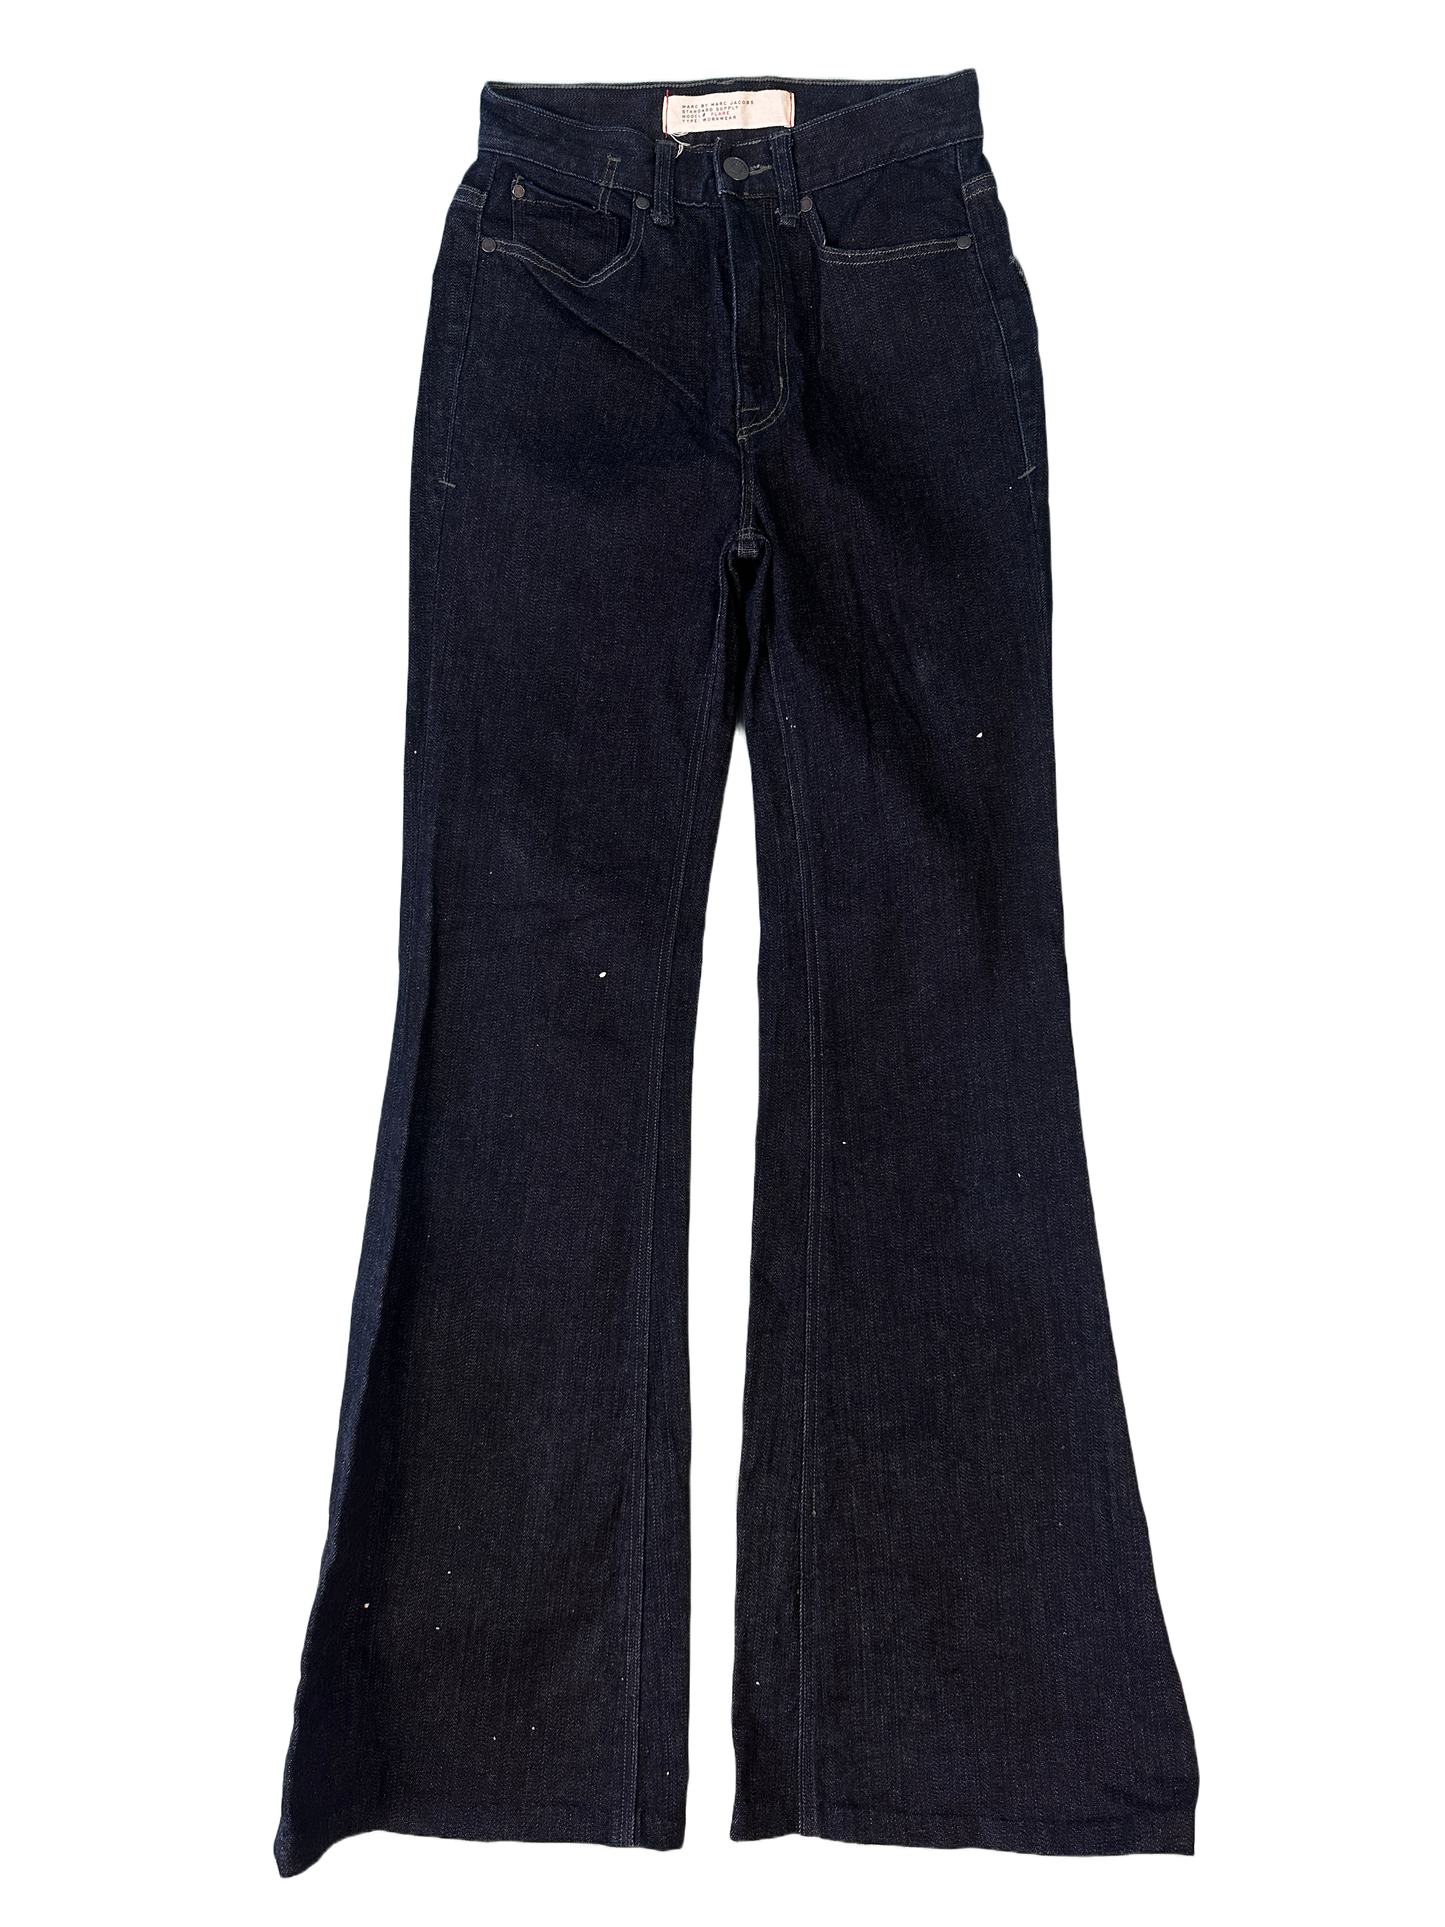 Marc Jacobs Flair Workwear Jeans - 24